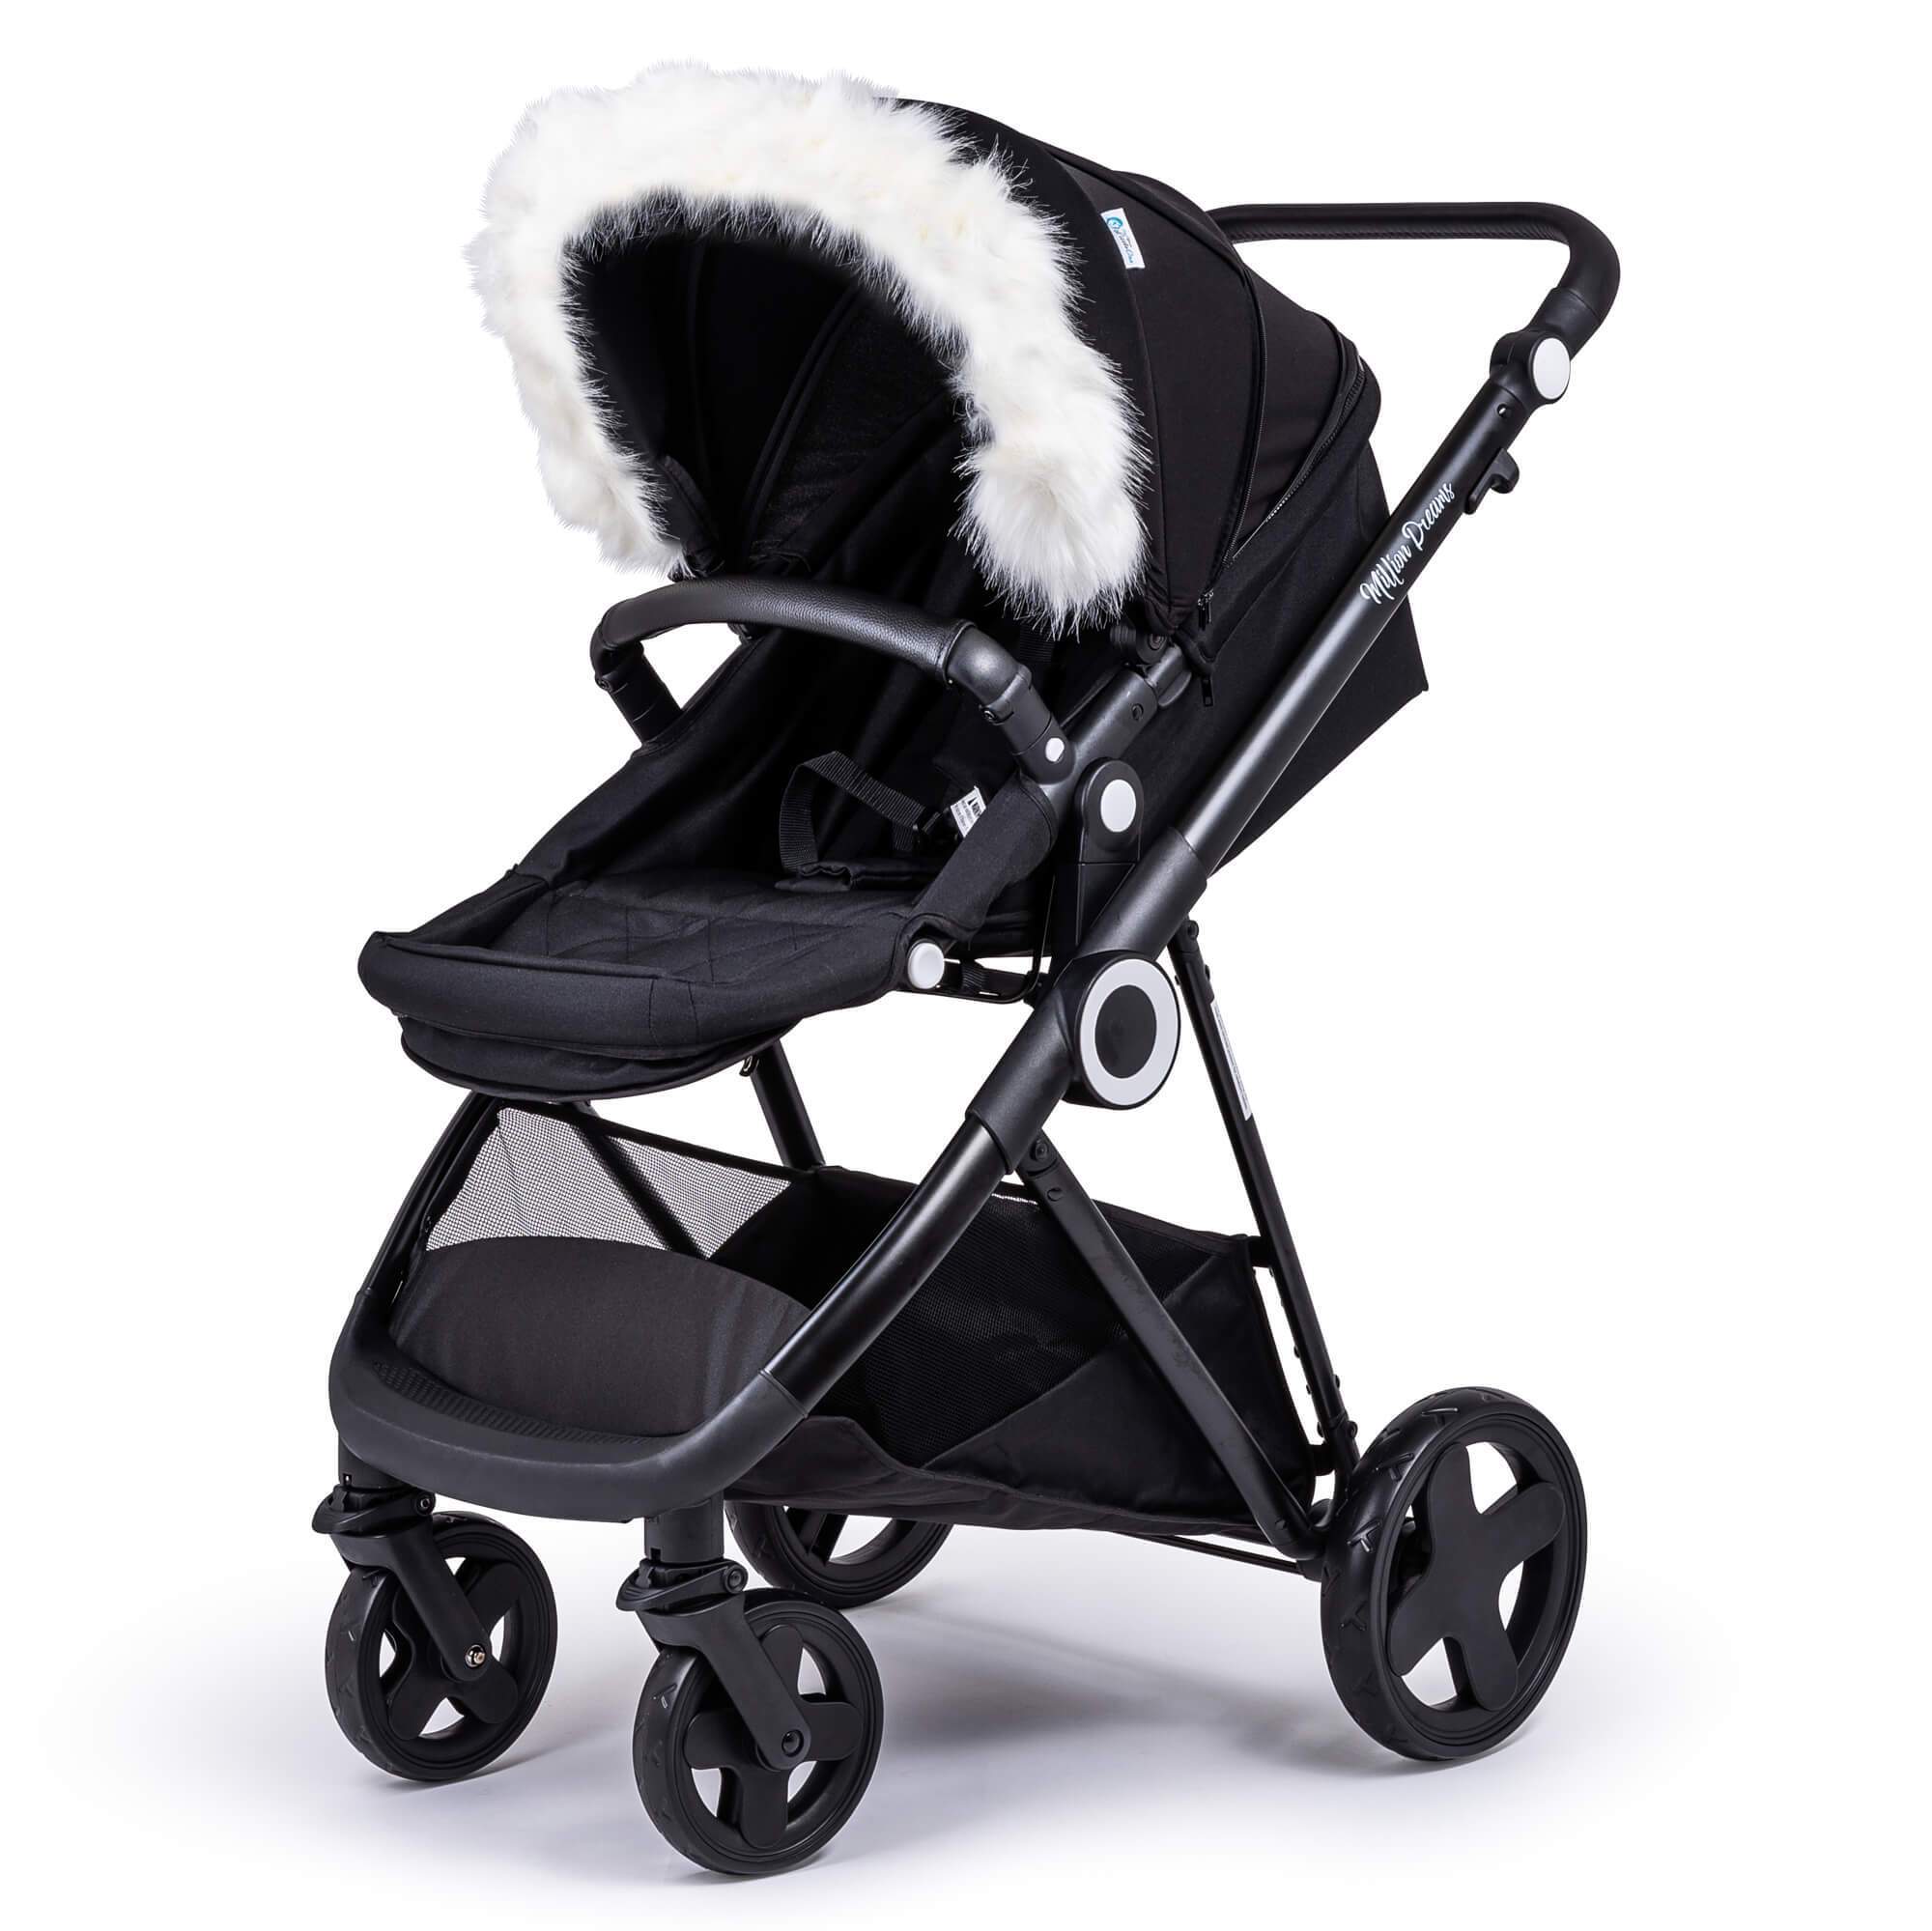 Pram Fur Hood Trim Attachment for Pushchair Compatible with ABC Design - White / Fits All Models | For Your Little One